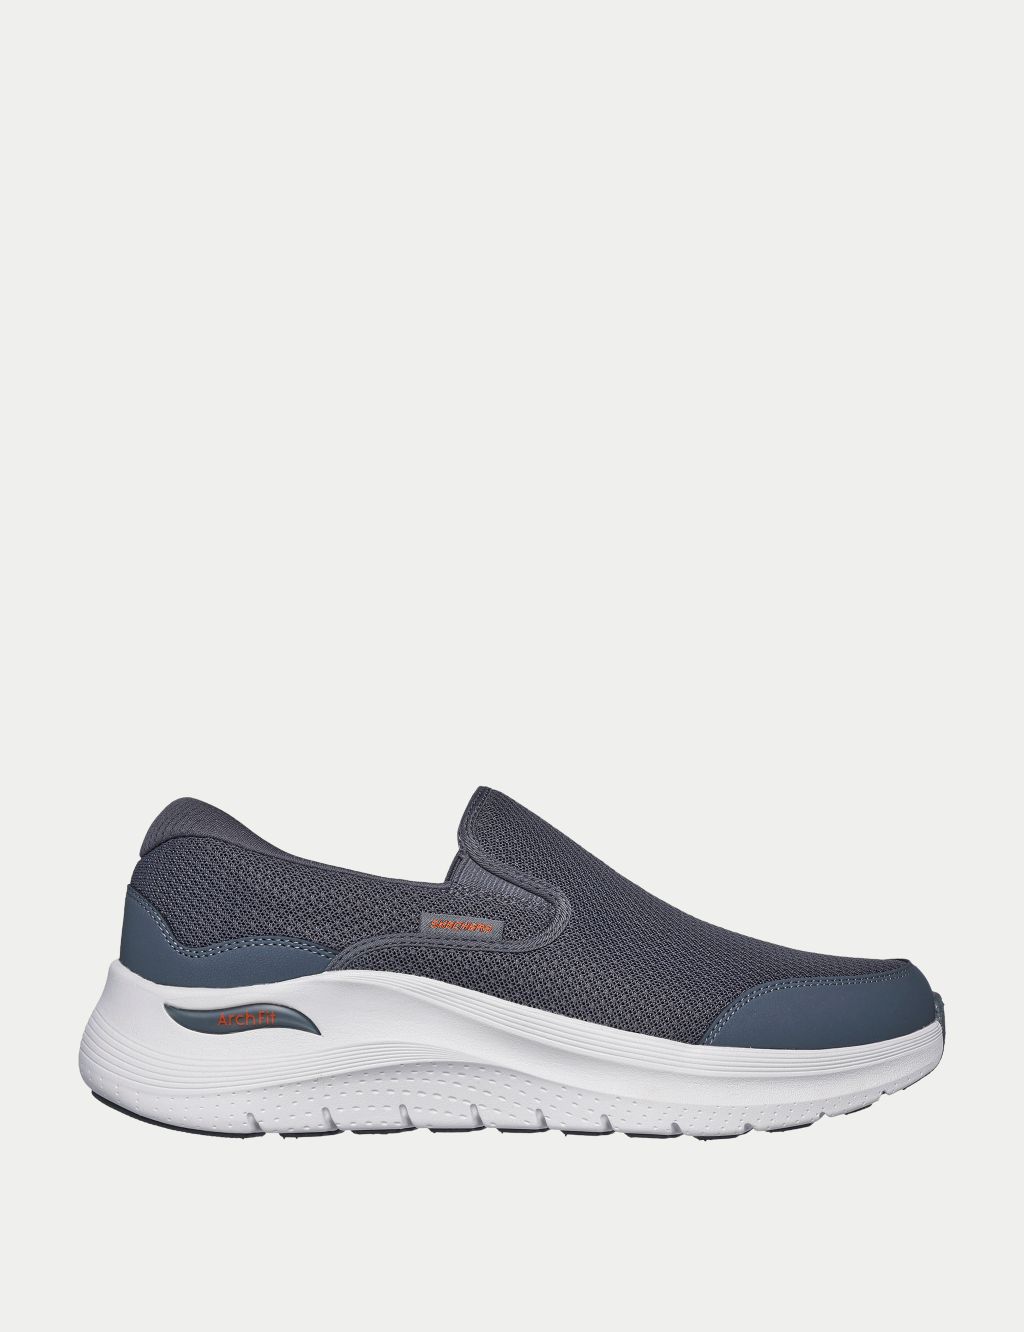 Arch Fit 2.0 Vallo Leather Slip-On Trainers